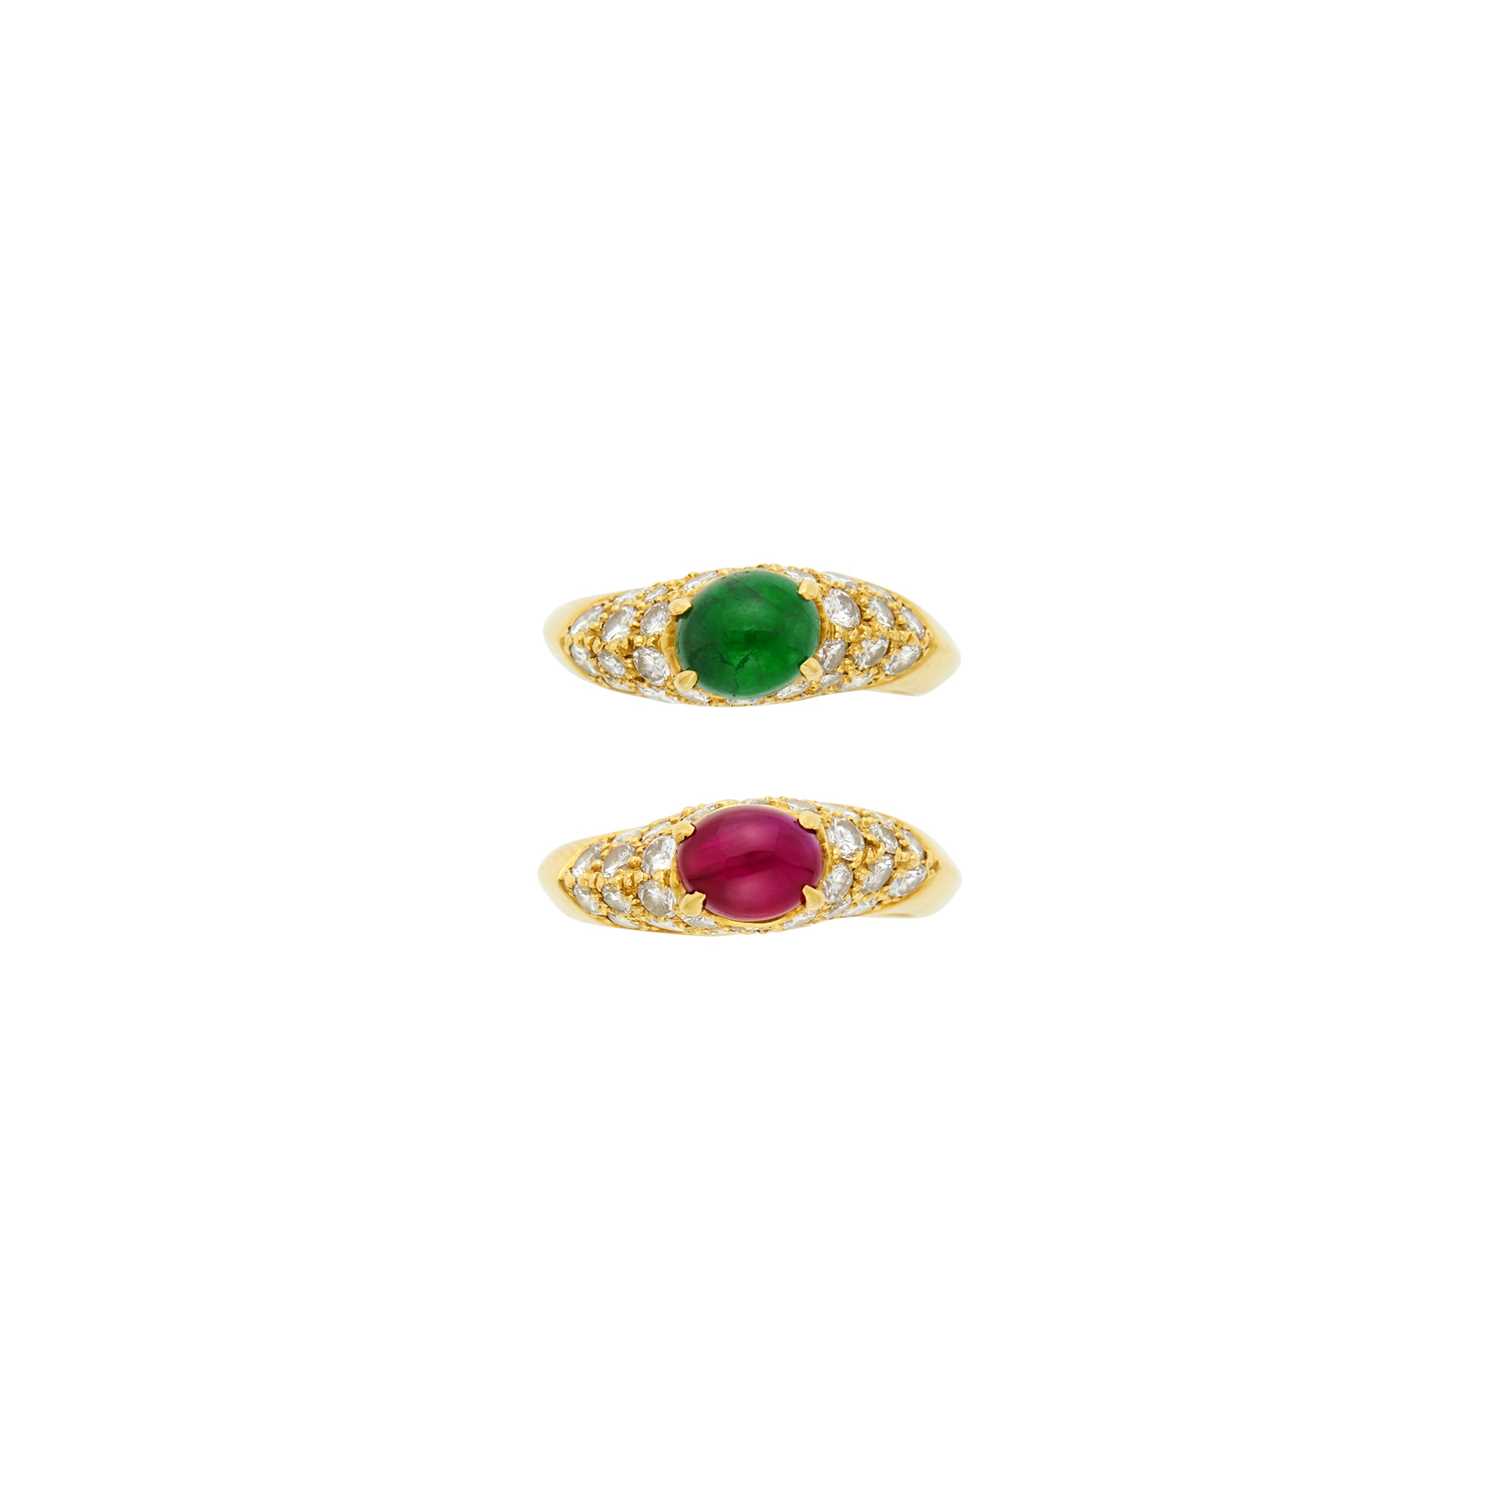 Lot 1005 - Van Cleef & Arpels Pair of Gold, Cabochon Colored Stone and Diamond Rings